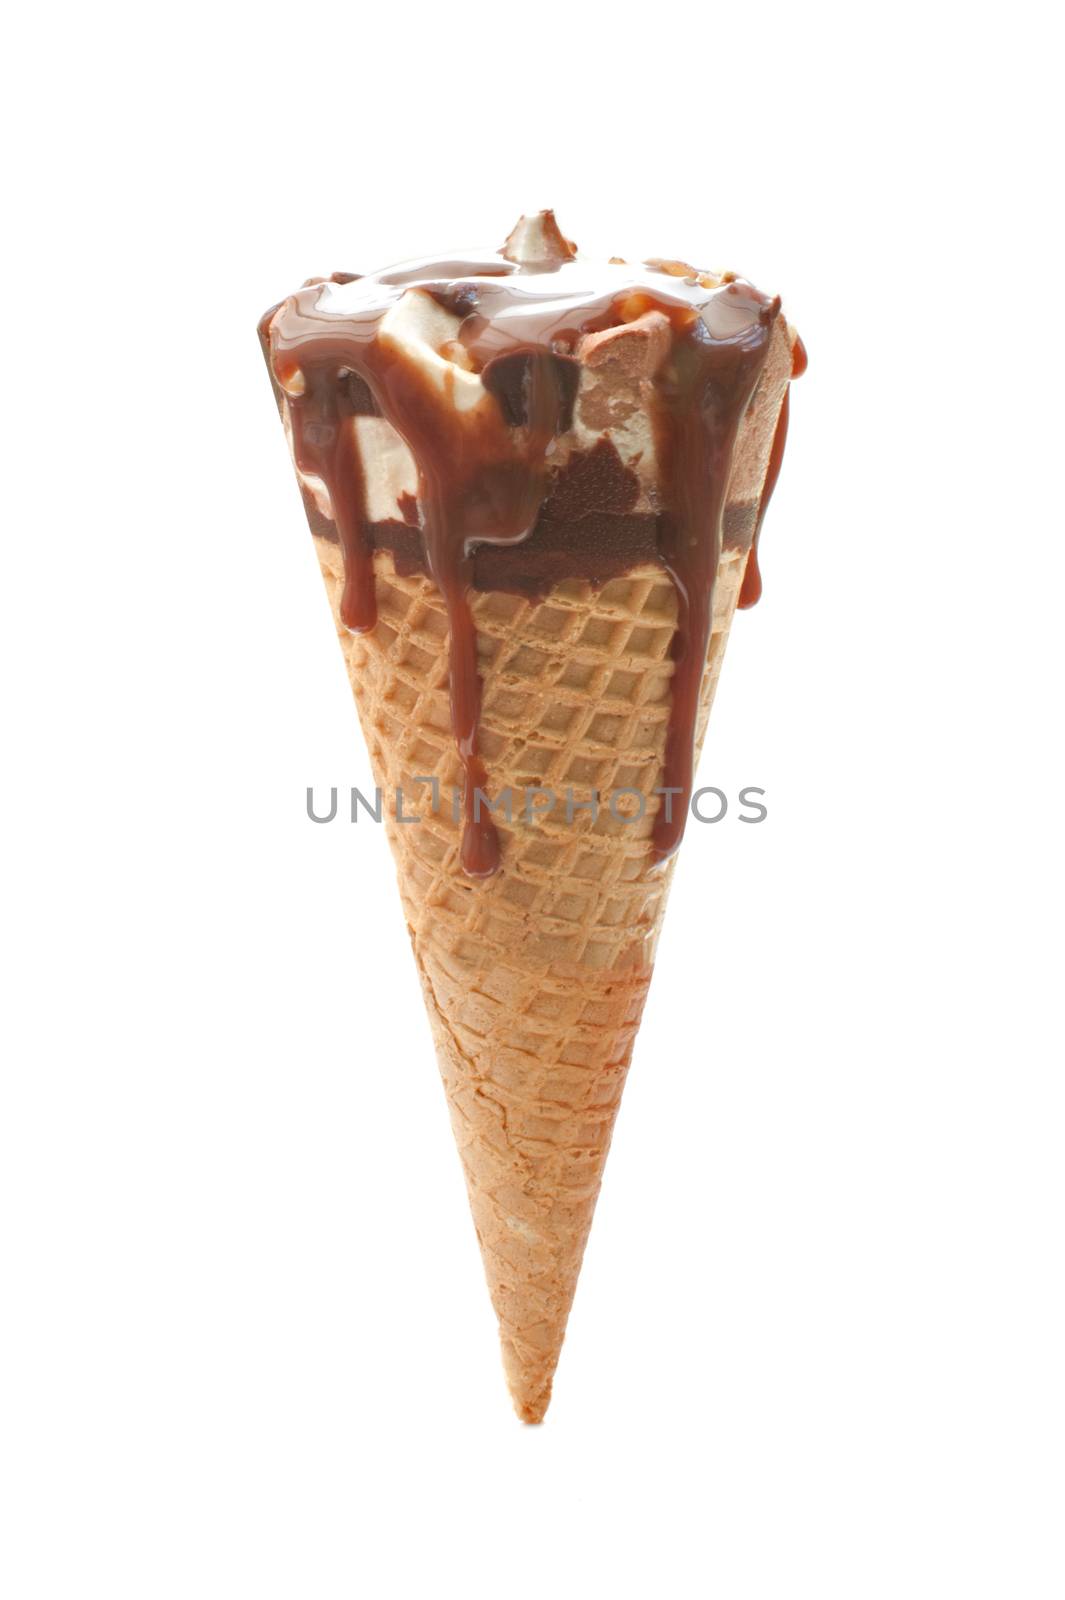 Chocolate icecream in a cone with syrup